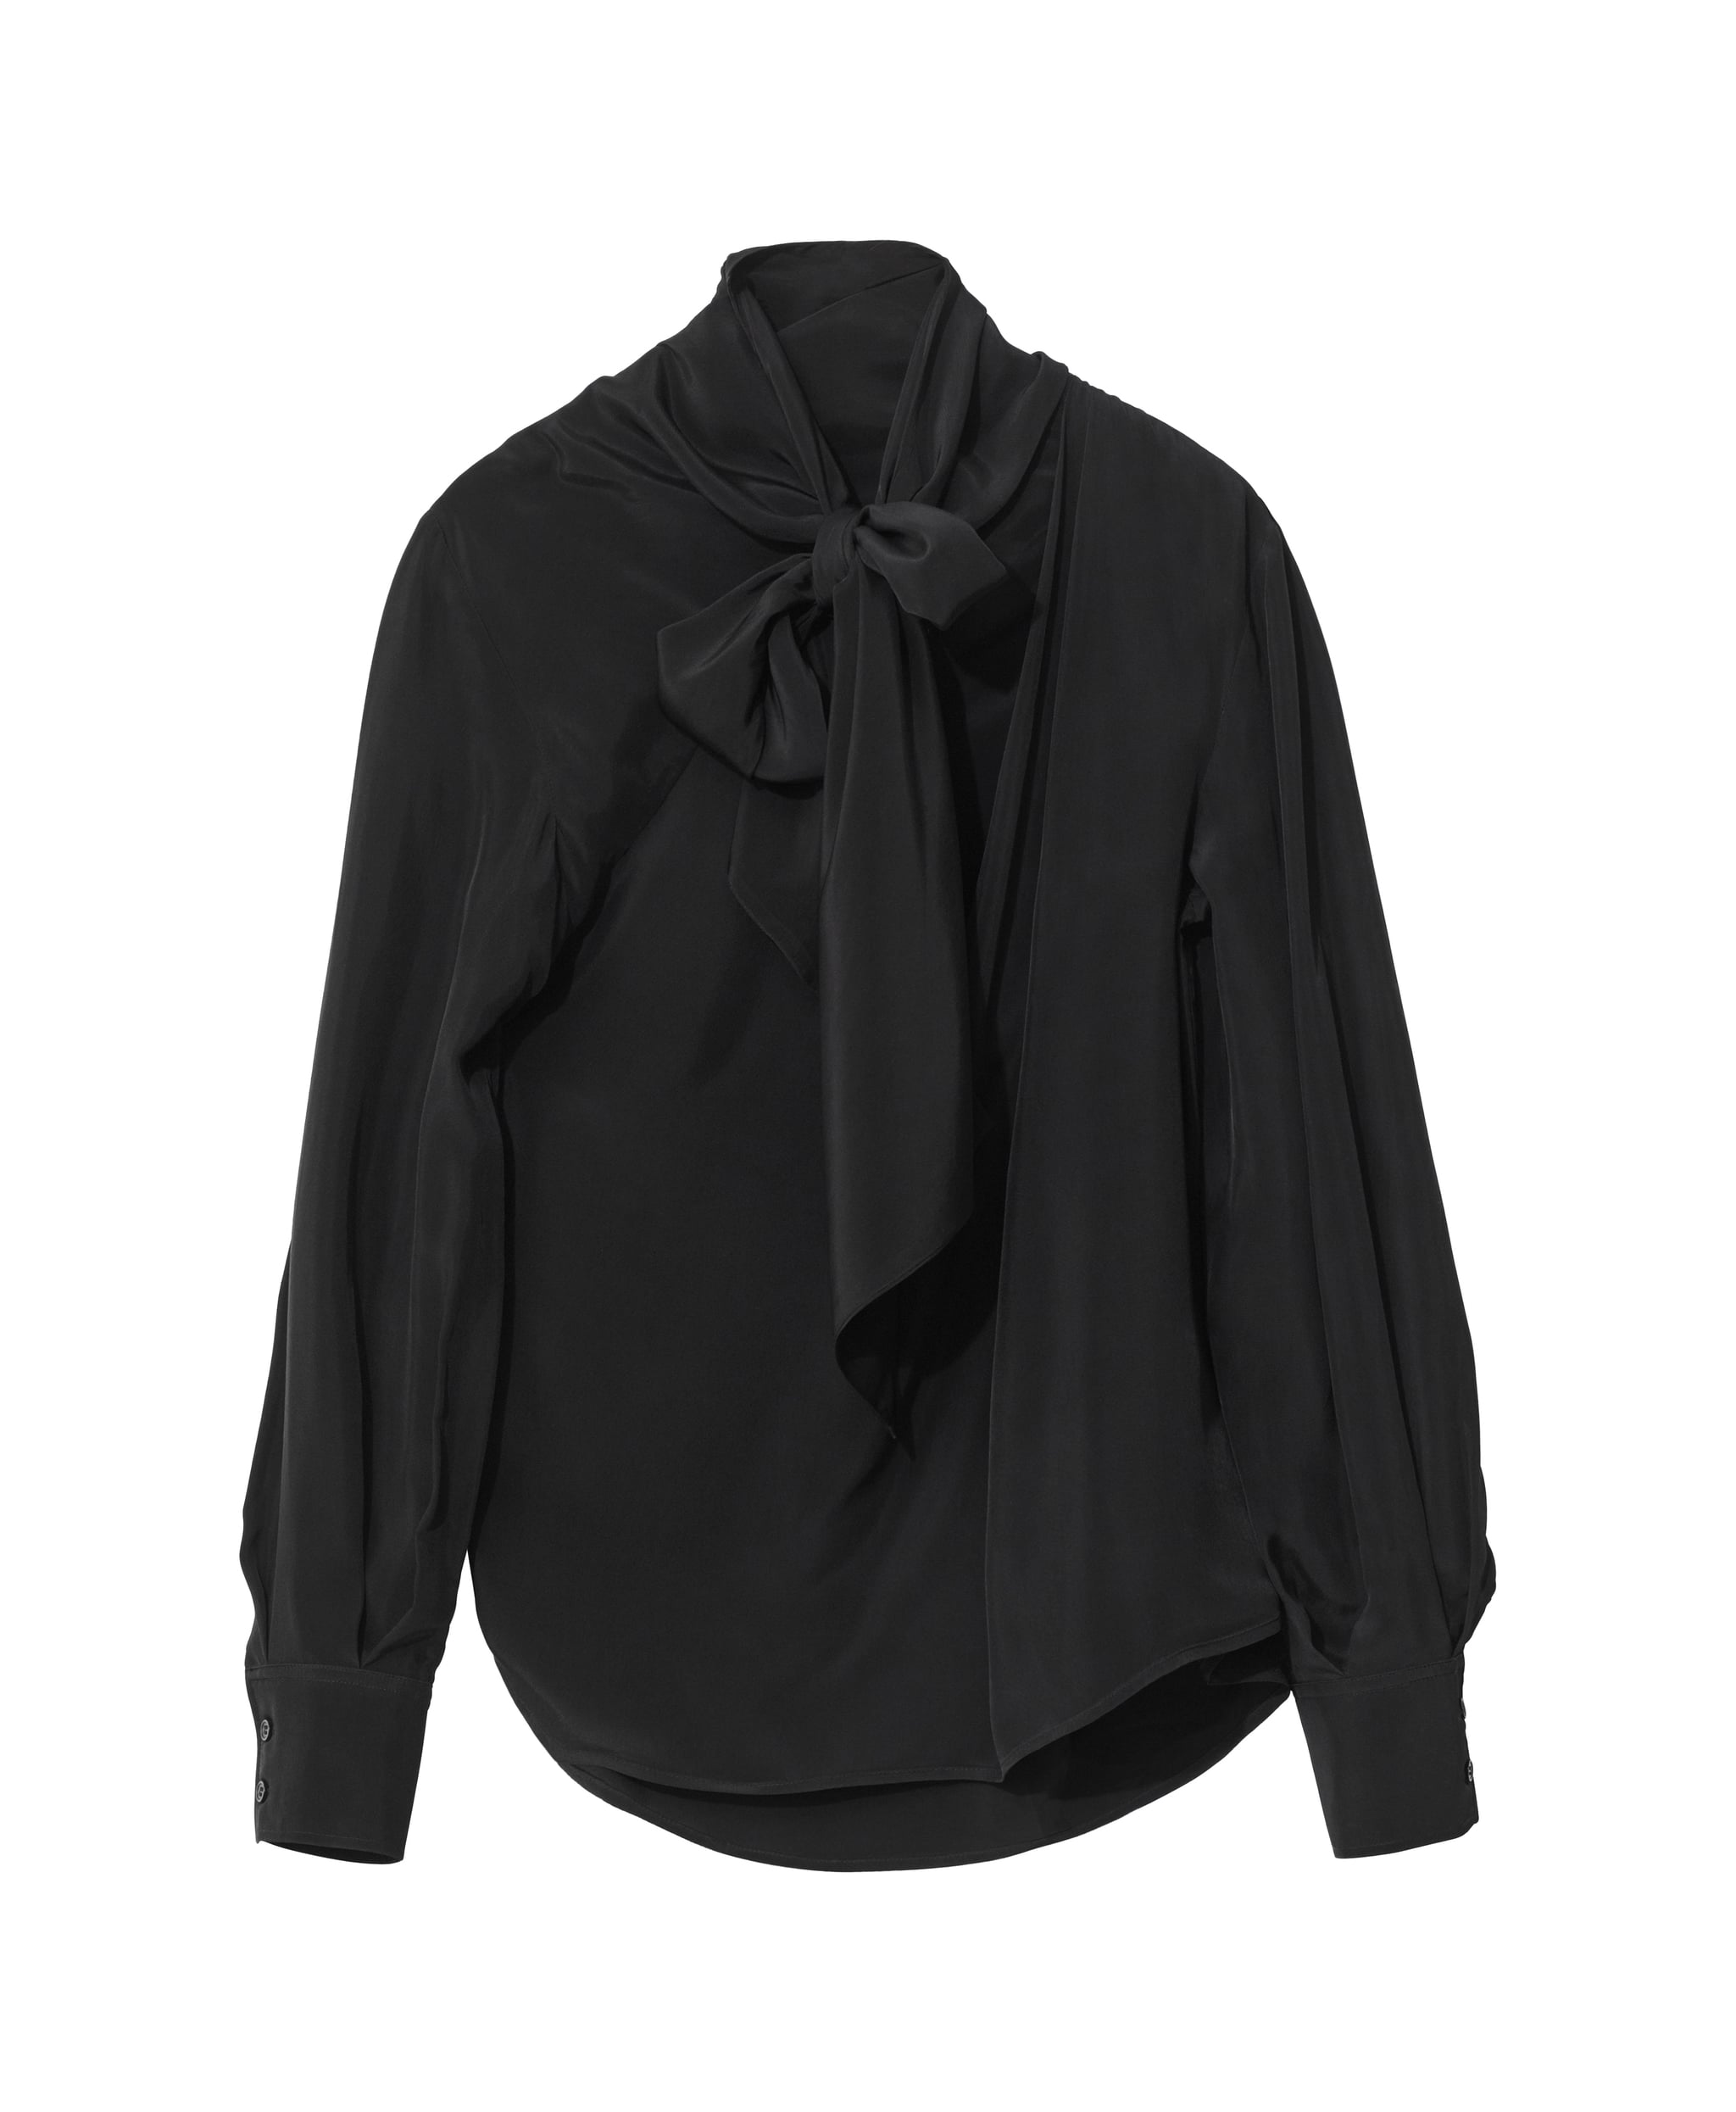 Bewust Ontslag Drijvende kracht H&M Blouse With Ties | H&M's New Collection Is Marilyn Monroe Meets James  Dean, So Taylor Swift Would Be Obsessed | POPSUGAR Fashion Photo 47